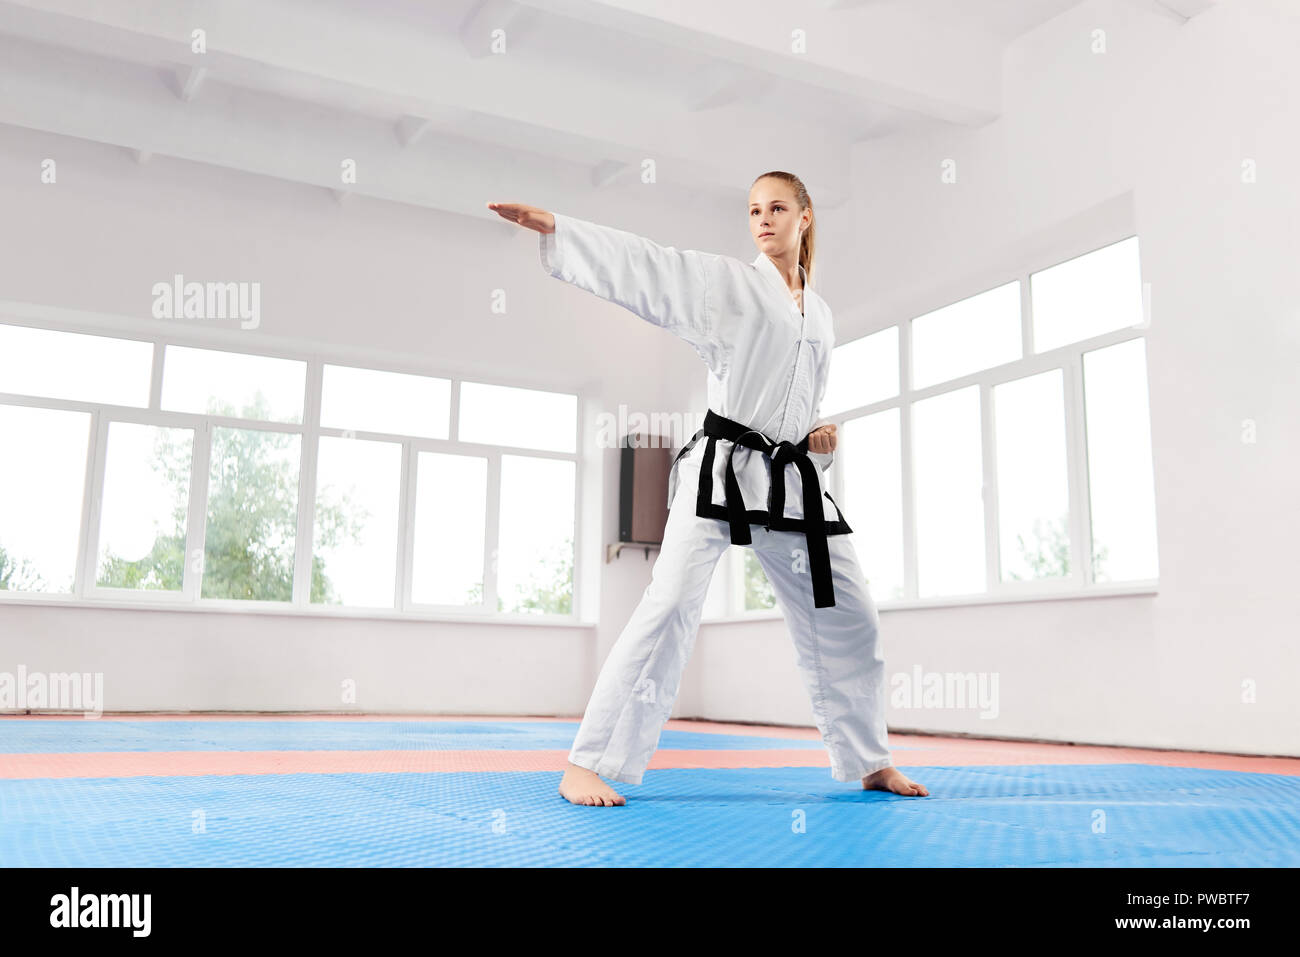 Sporty karate woman in white kimono with black belt training karate against big window at fight class. Female fighter with blue eyes and braided hair standing ready to attack her opponent. Stock Photo